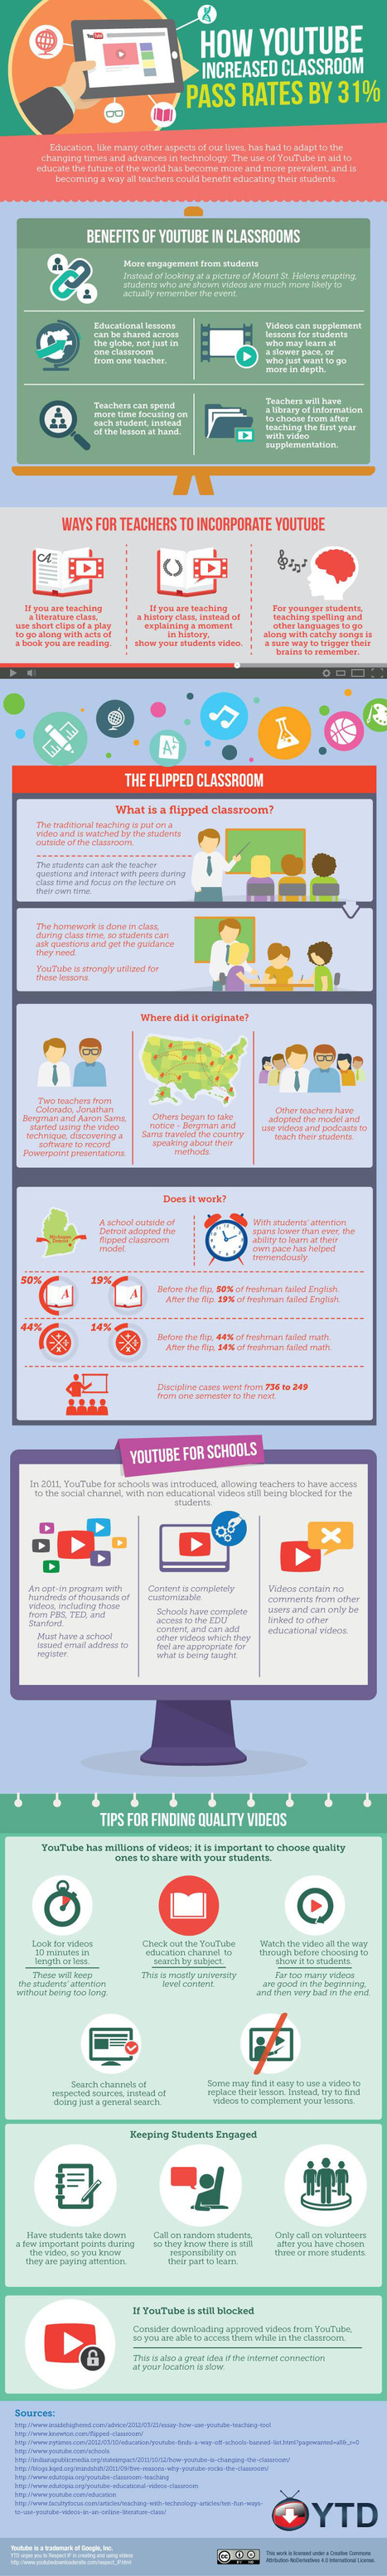 Teaching With YouTube (Infographic) | Digital Delights - Digital Tribes | Scoop.it